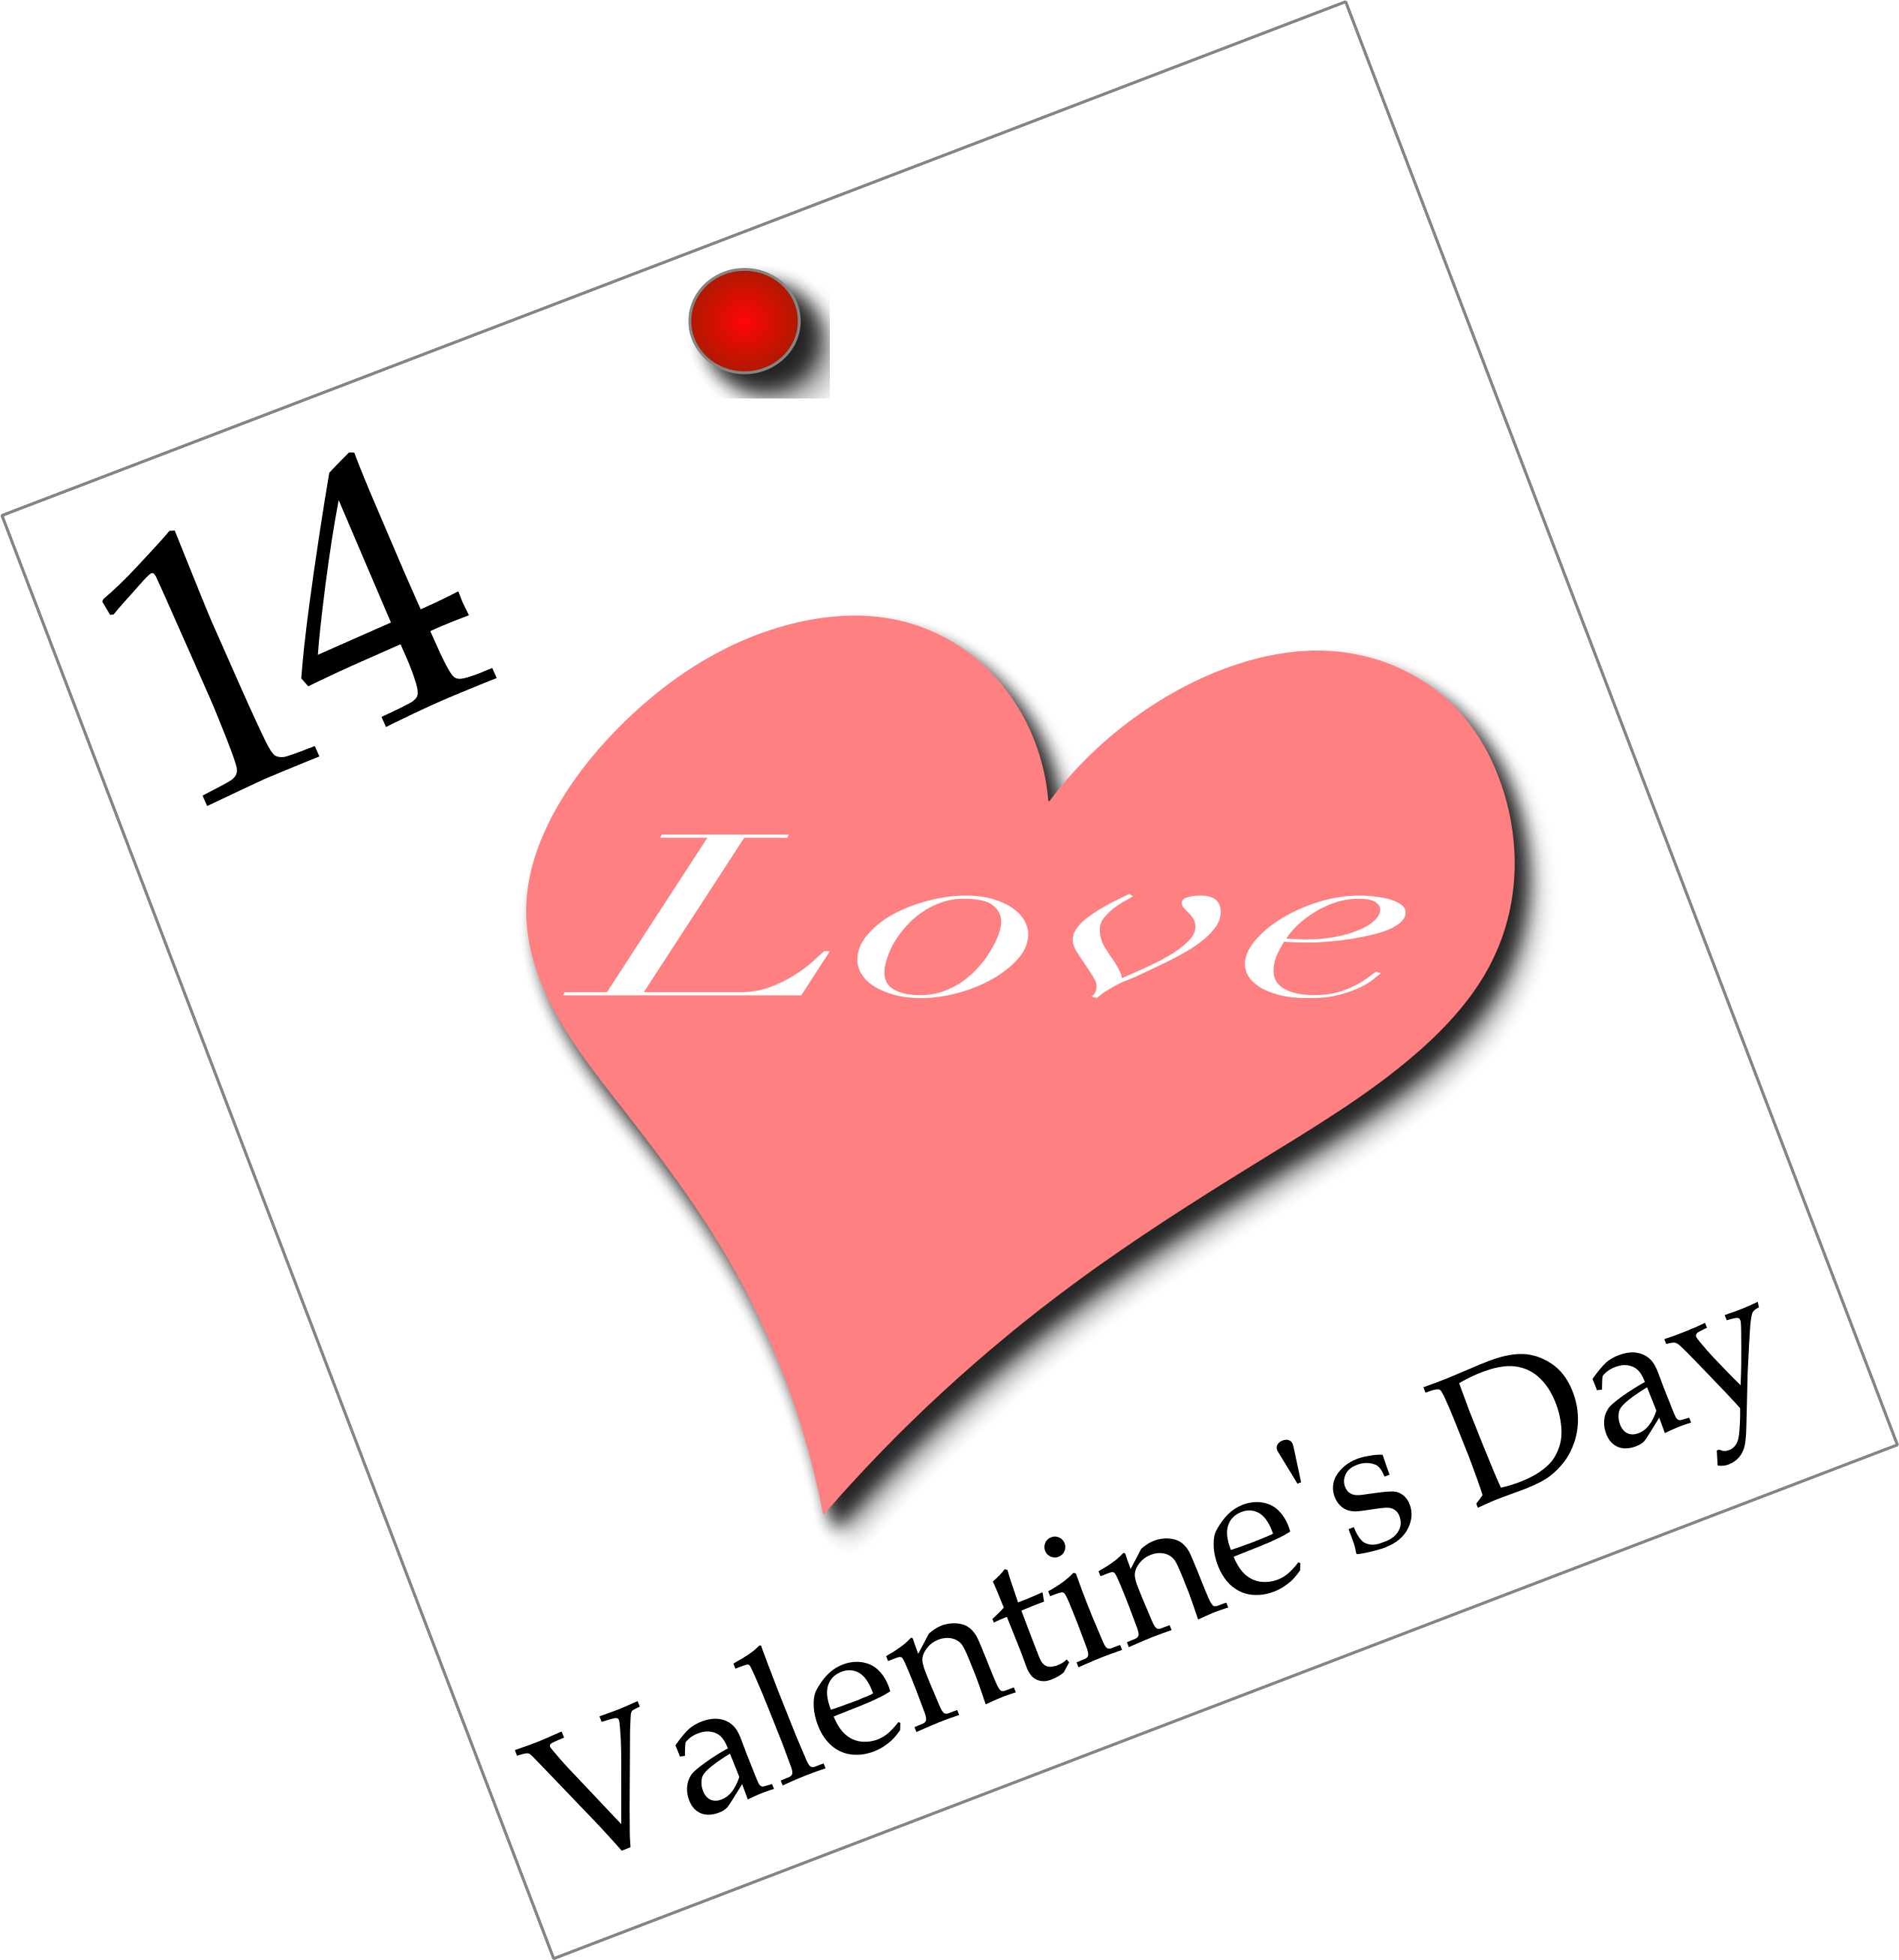 i love you clipart images - photo #19